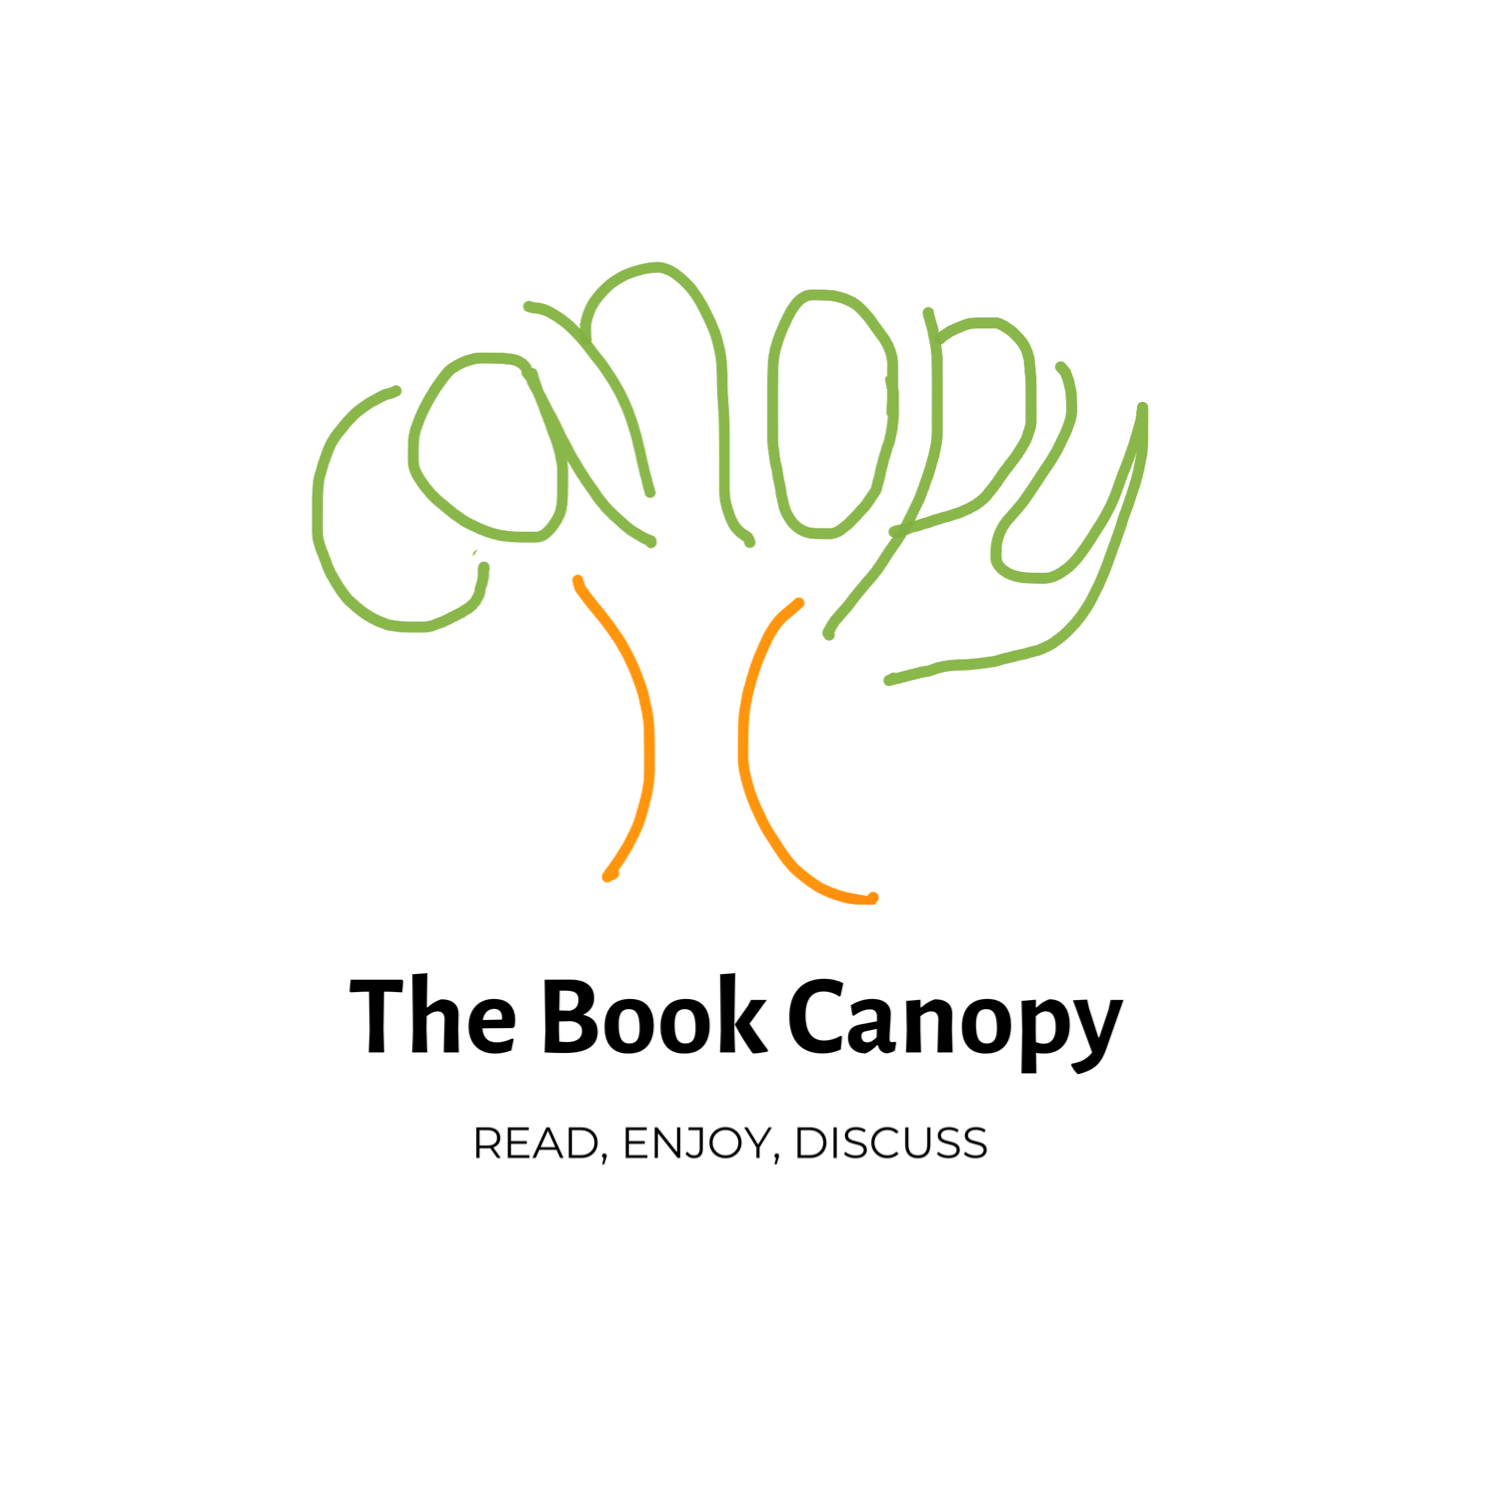 The Book Canopy